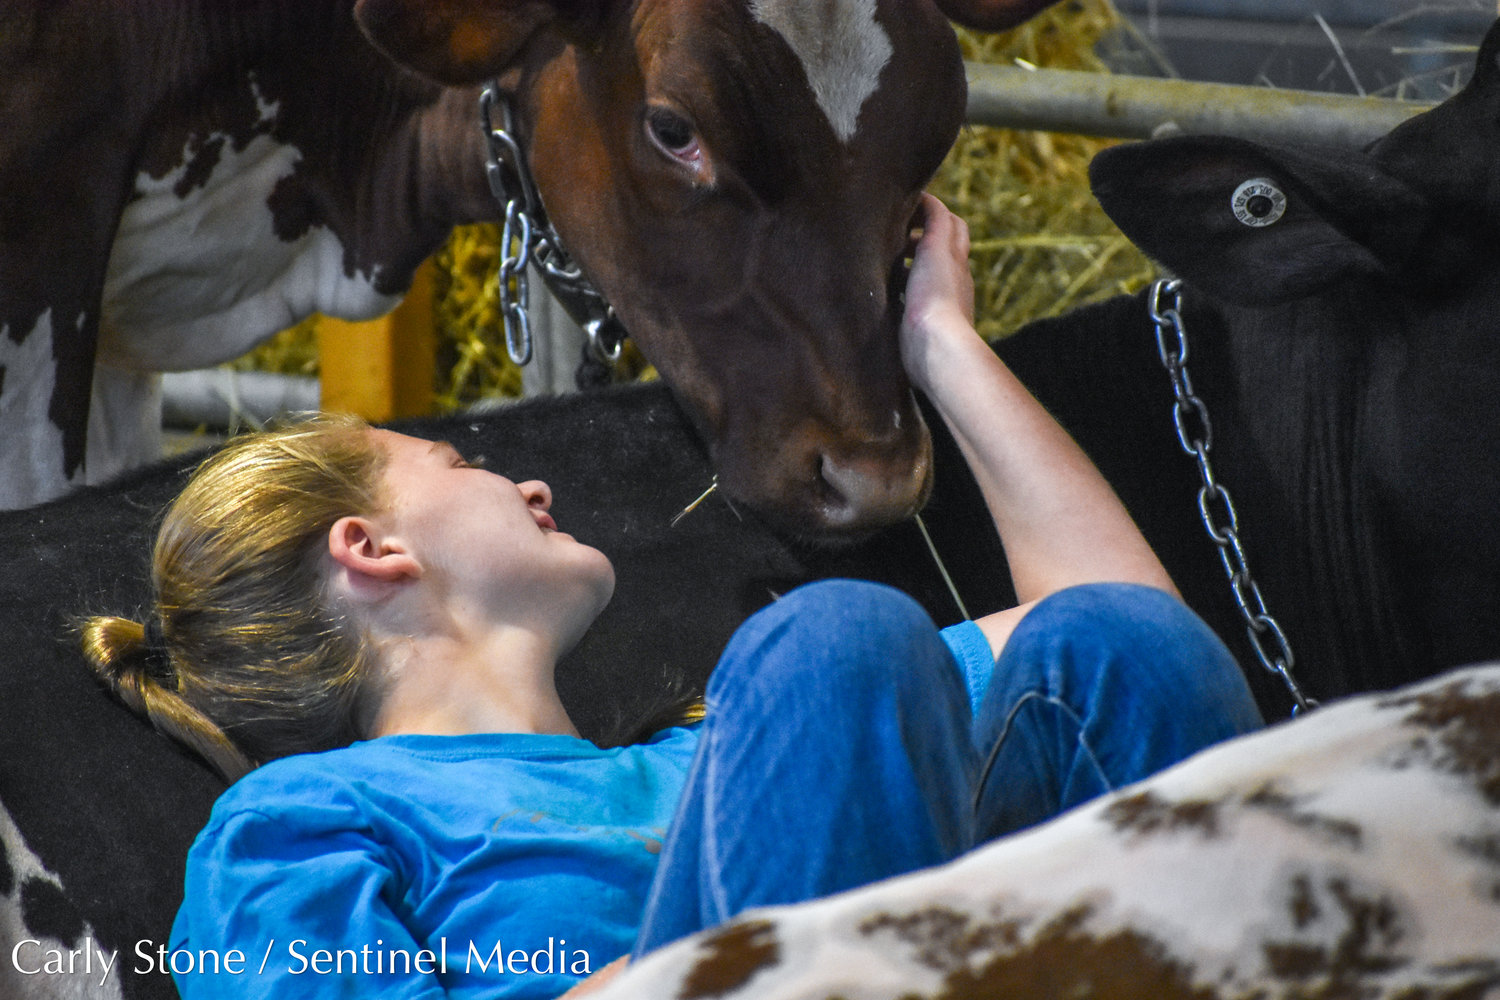 13-year-old Olivia VanEvera, of Cobleskill, lounges with her show-cows at the New York State Fair. The brown cow getting a scratch is named Wynonna. The black cow serving as a backrest goes by the name "Party Time."